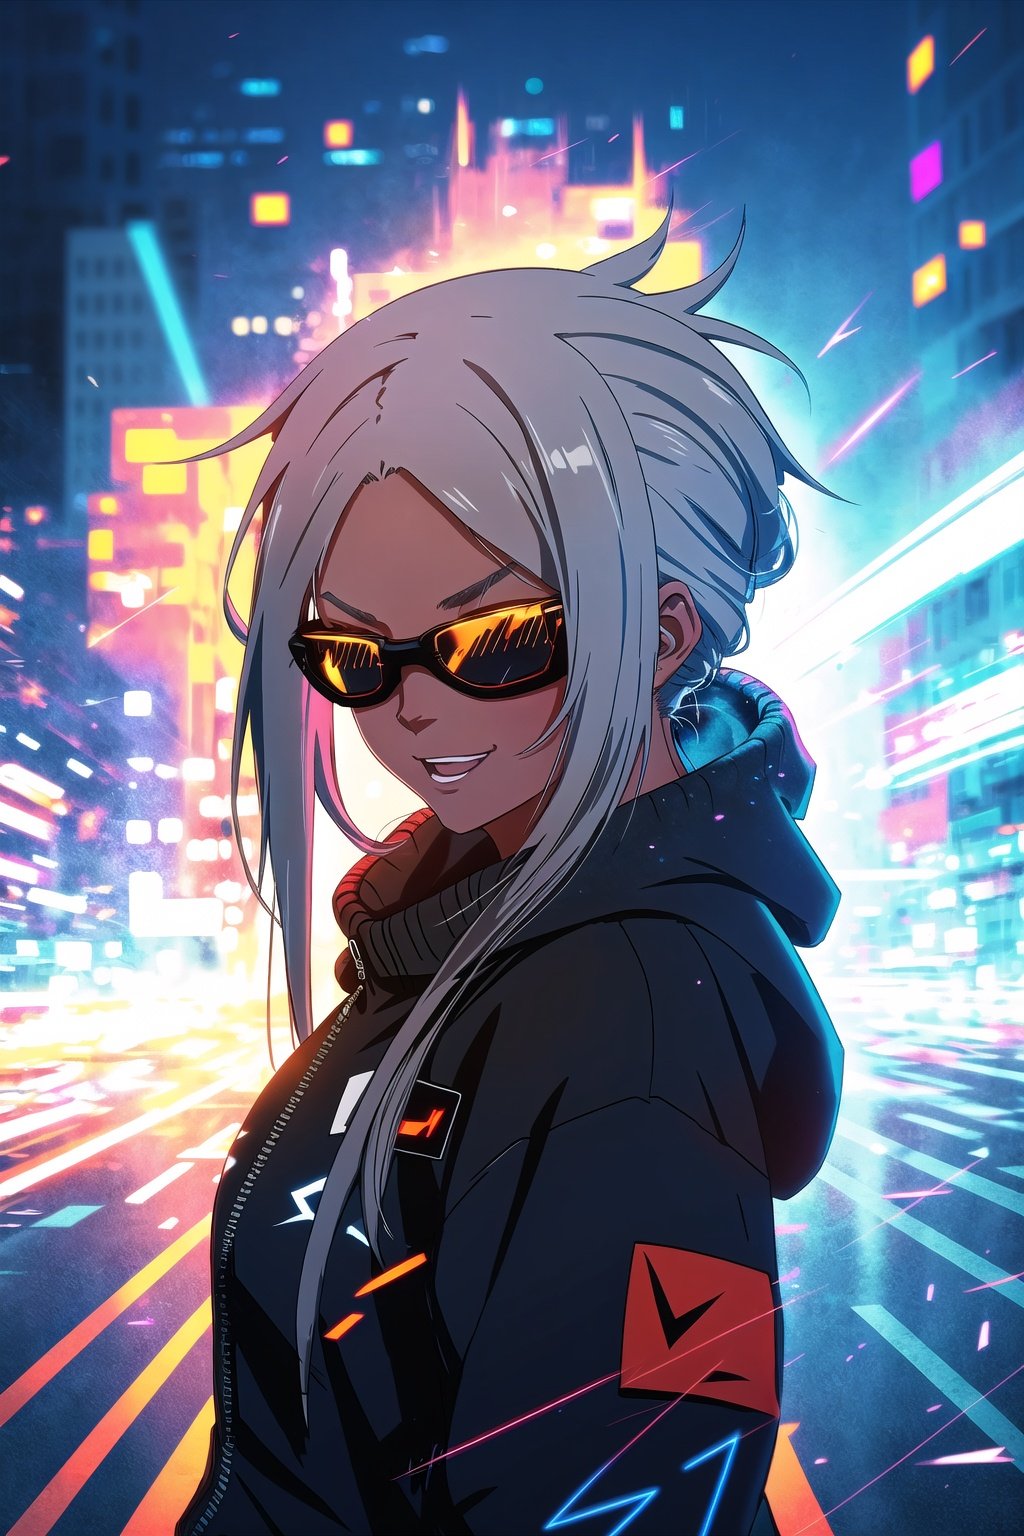 guiltys, happy, a girl, pixel glasses on, gray dreads hair, hoody on, upper body, deal with it, (bokeh:1.1), depth of field, style of Alena Aenami, tracers, vfx, splashes, lightning, light particles, electric, white background